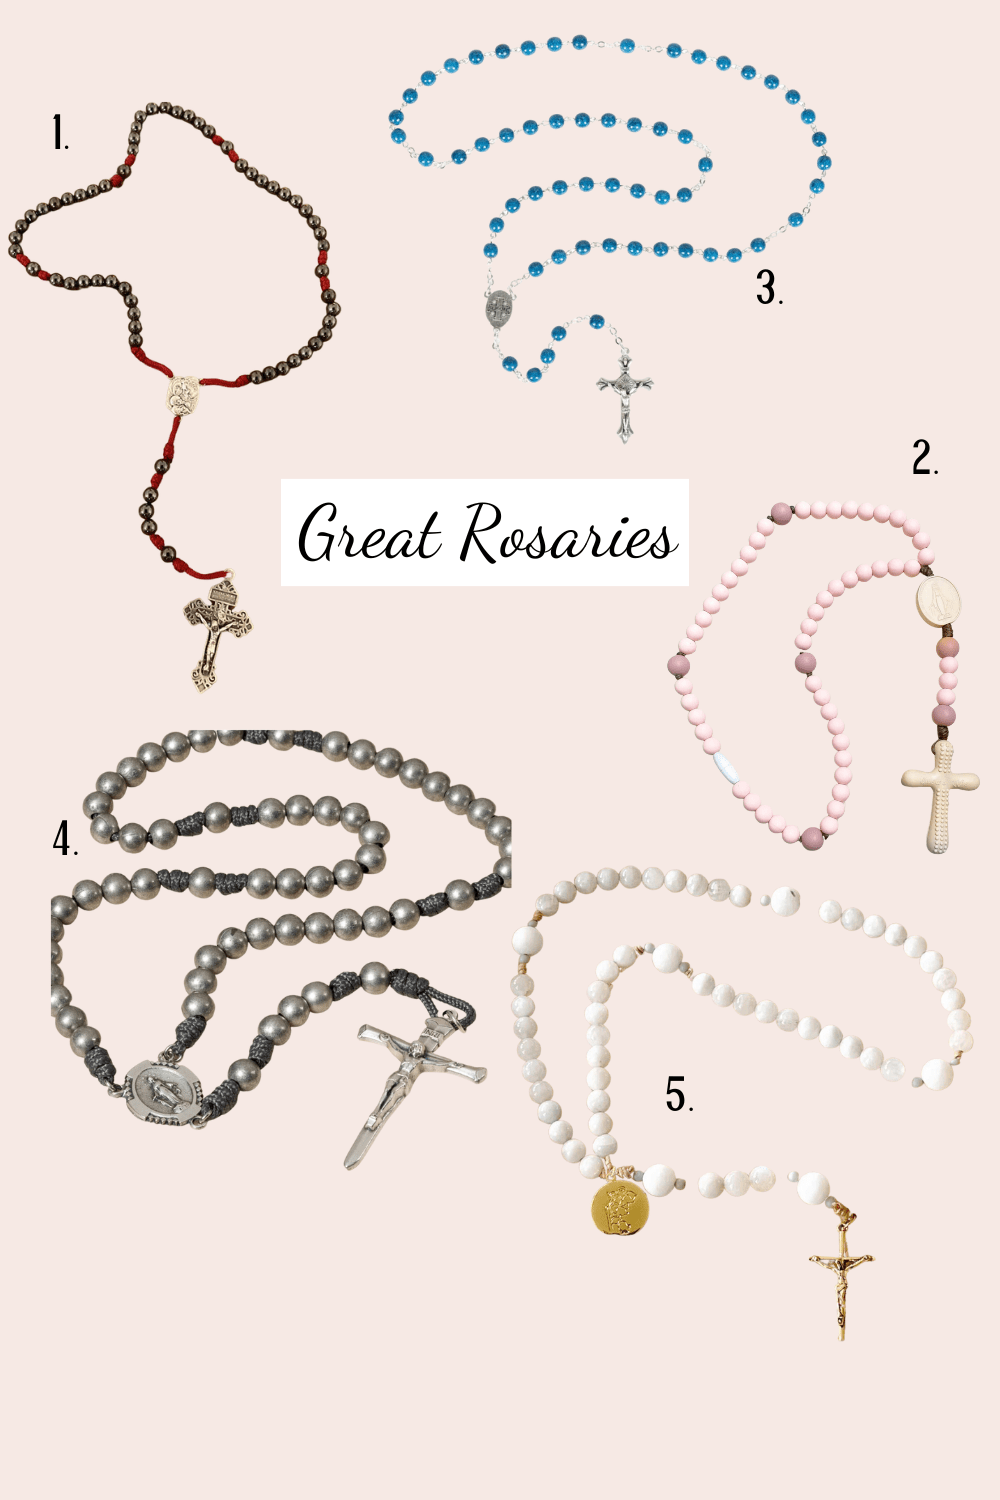 Options for Great Rosaries